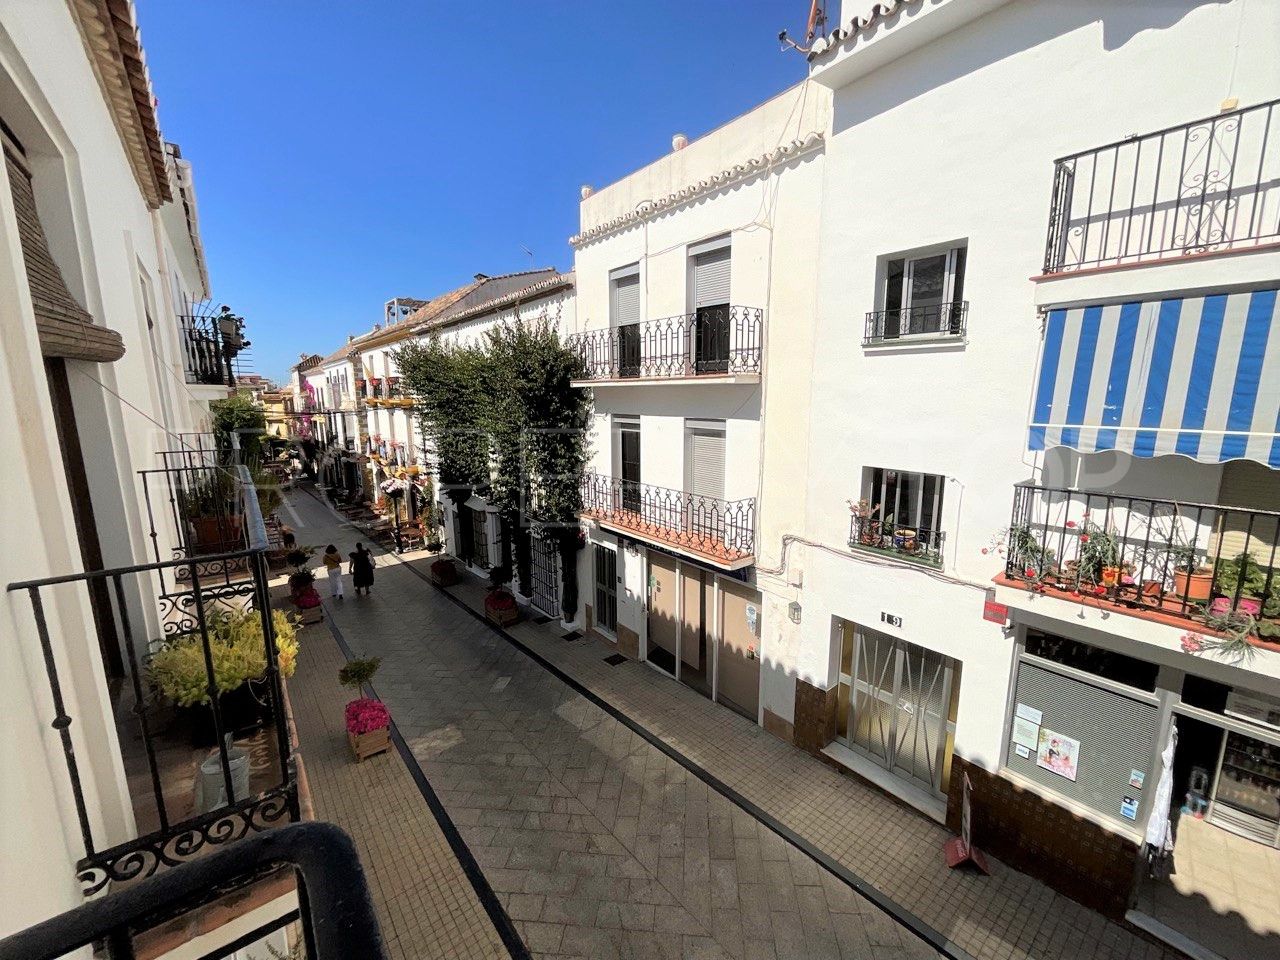 For sale house in Casco antiguo